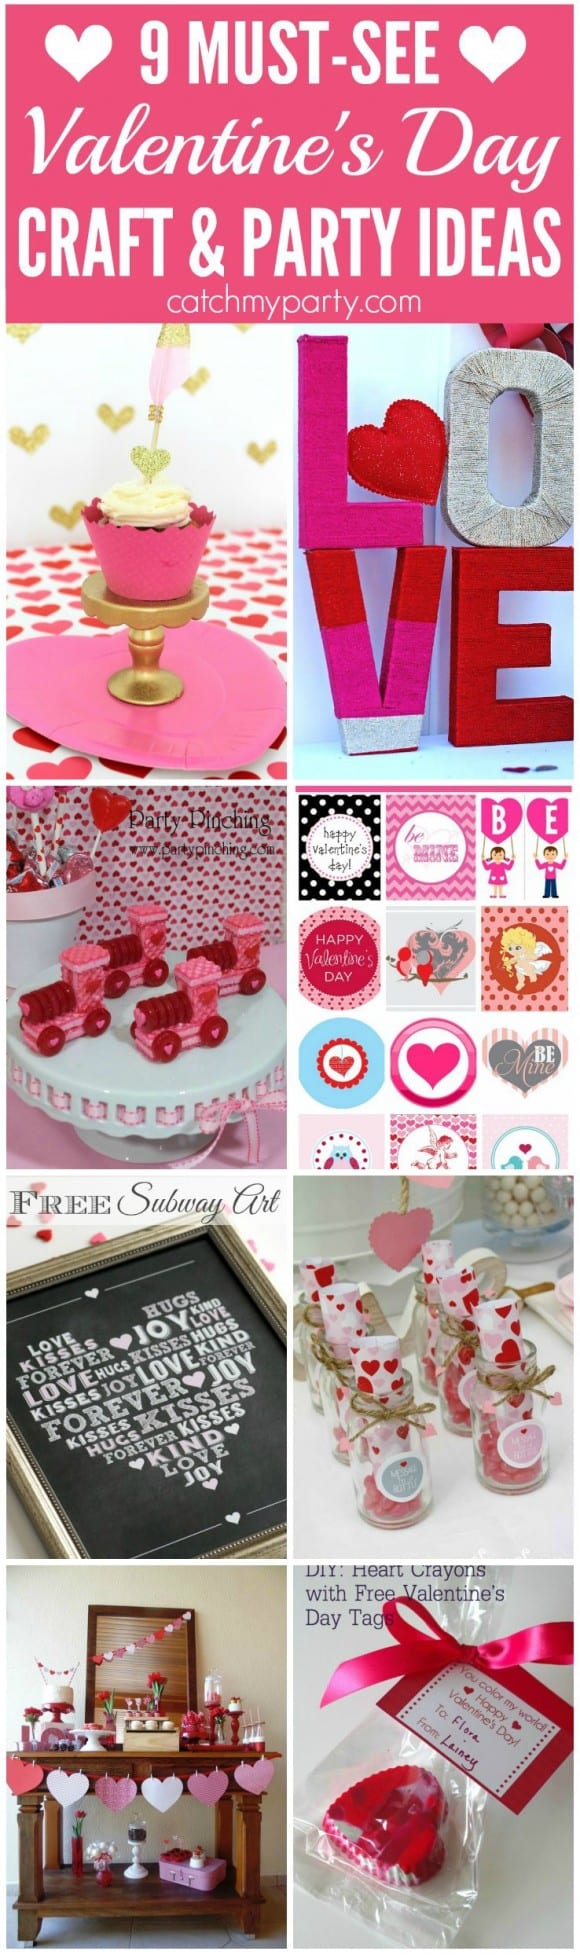 9 Must-See Valentine's Day Crafts & Party Ideas | CatchMyParty.com